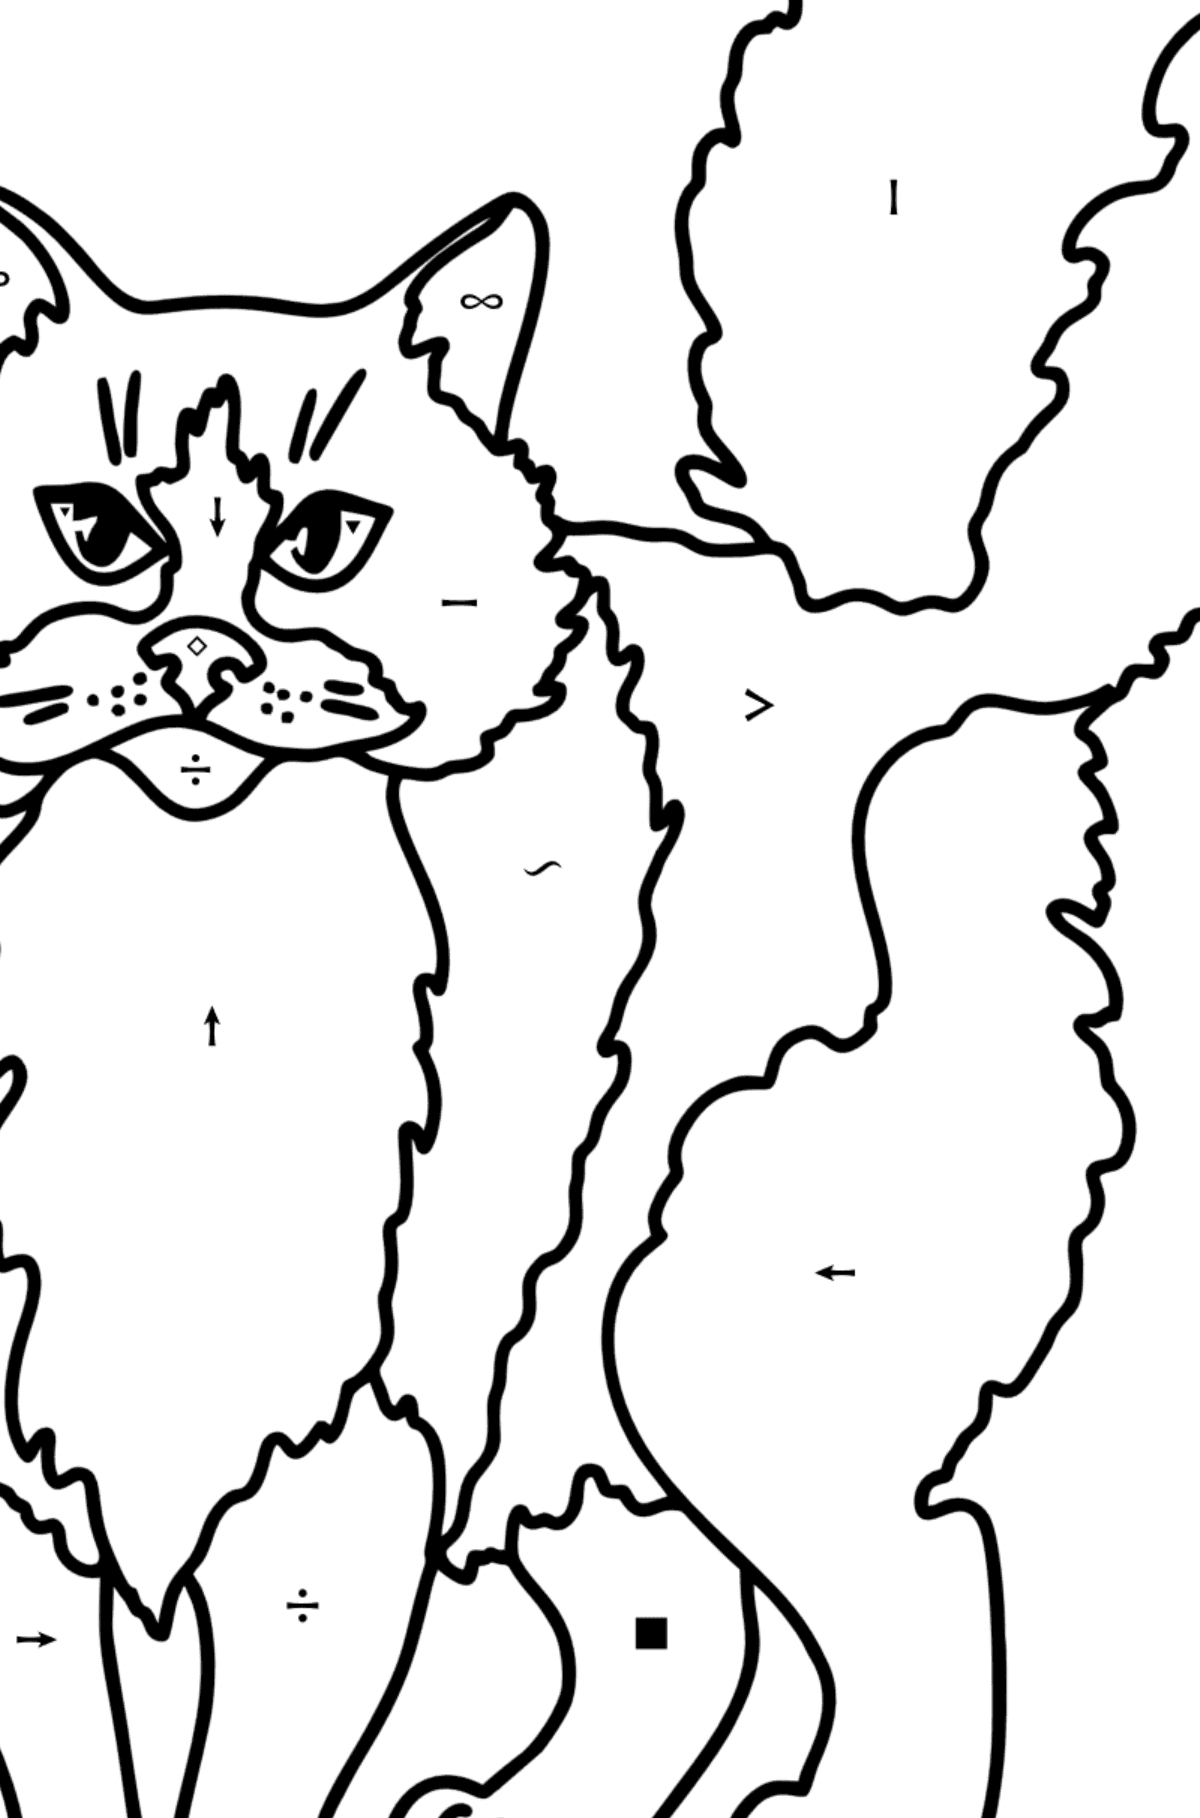 Ragdoll Cat coloring page - Coloring by Symbols for Kids